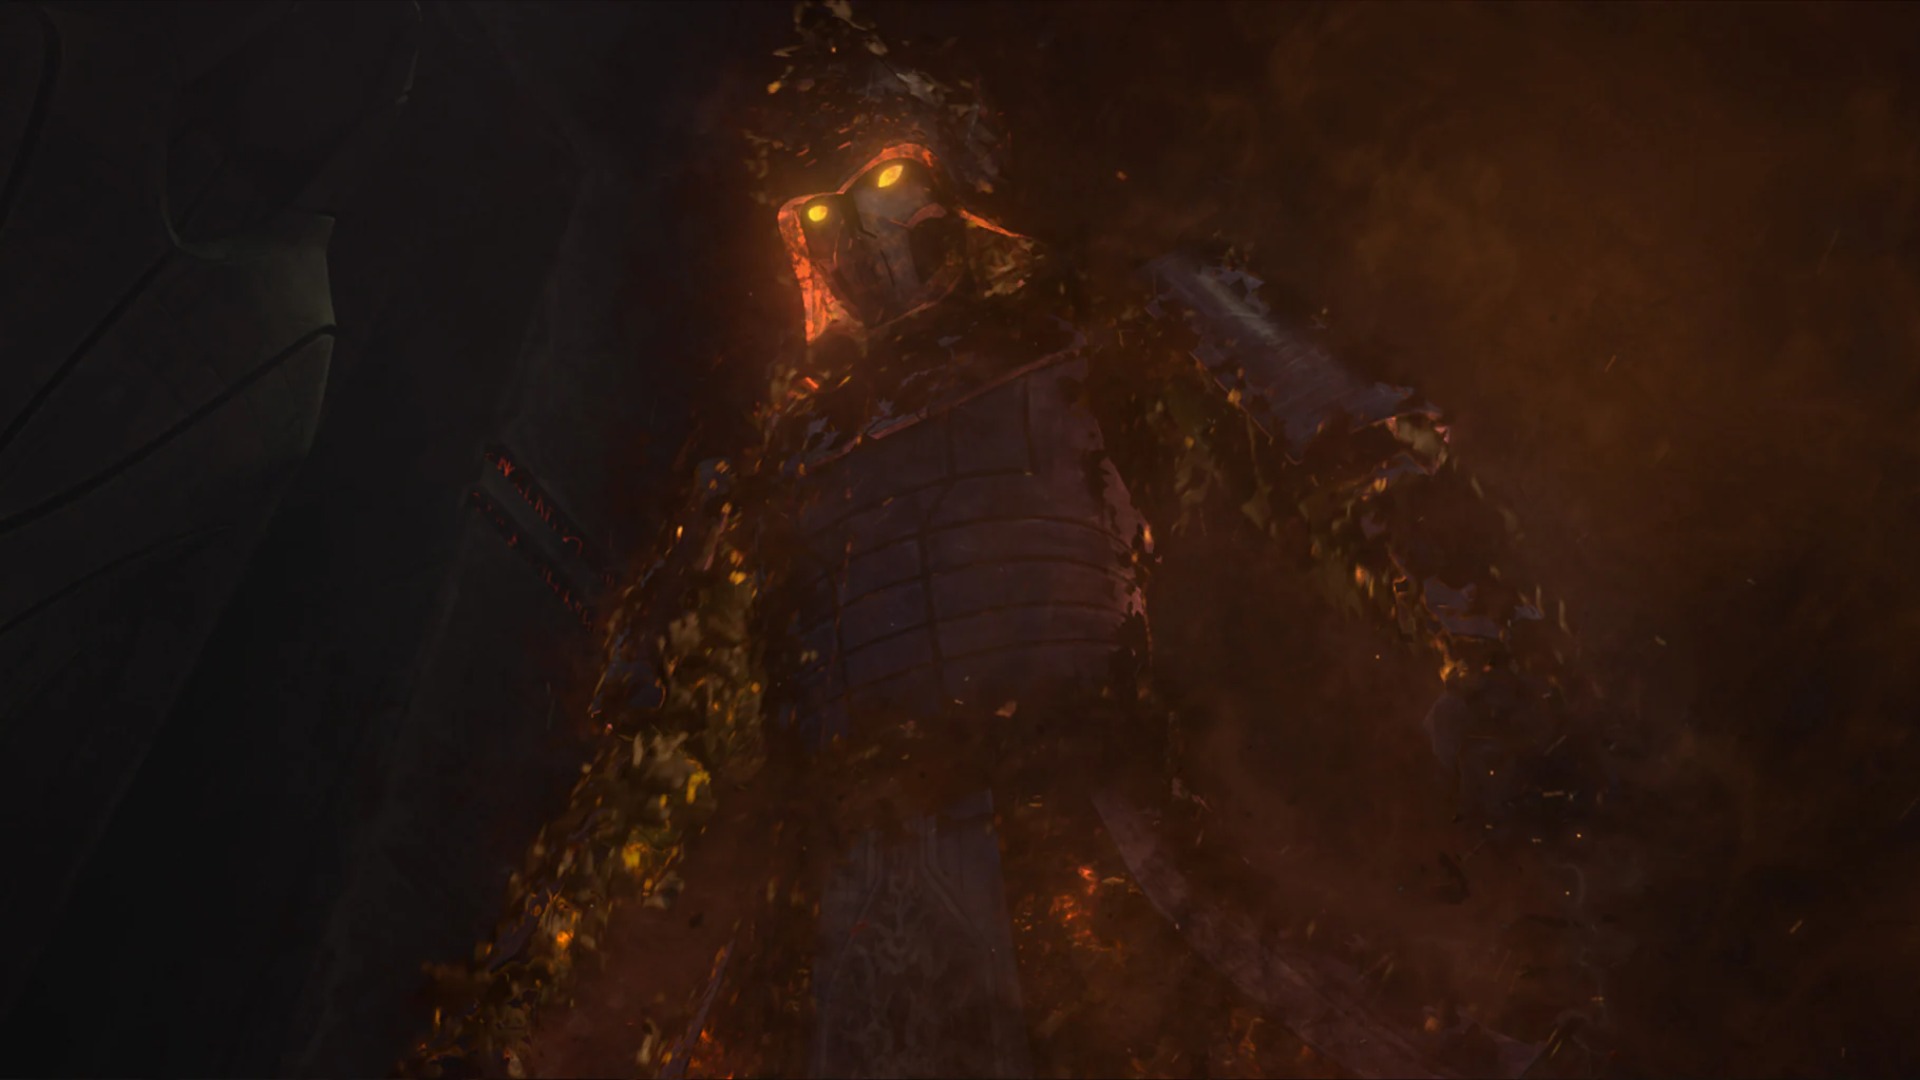 A smoldering illusion of Darth Bane appearing before Yoda in "Star Wars: The Clone Wars."